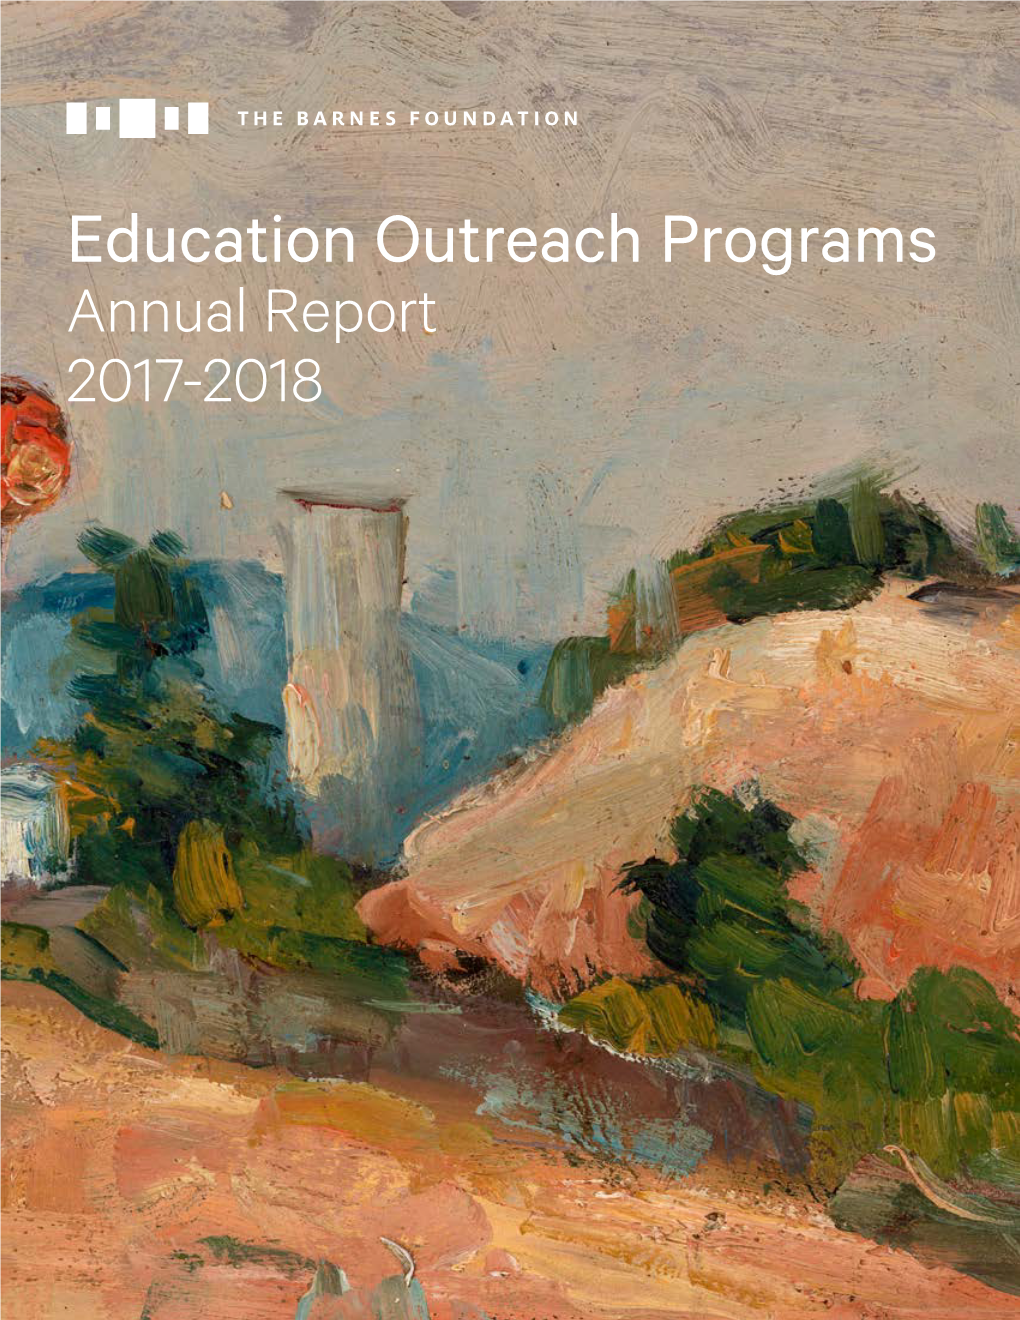 Education Outreach Programs Annual Report 2017-2018